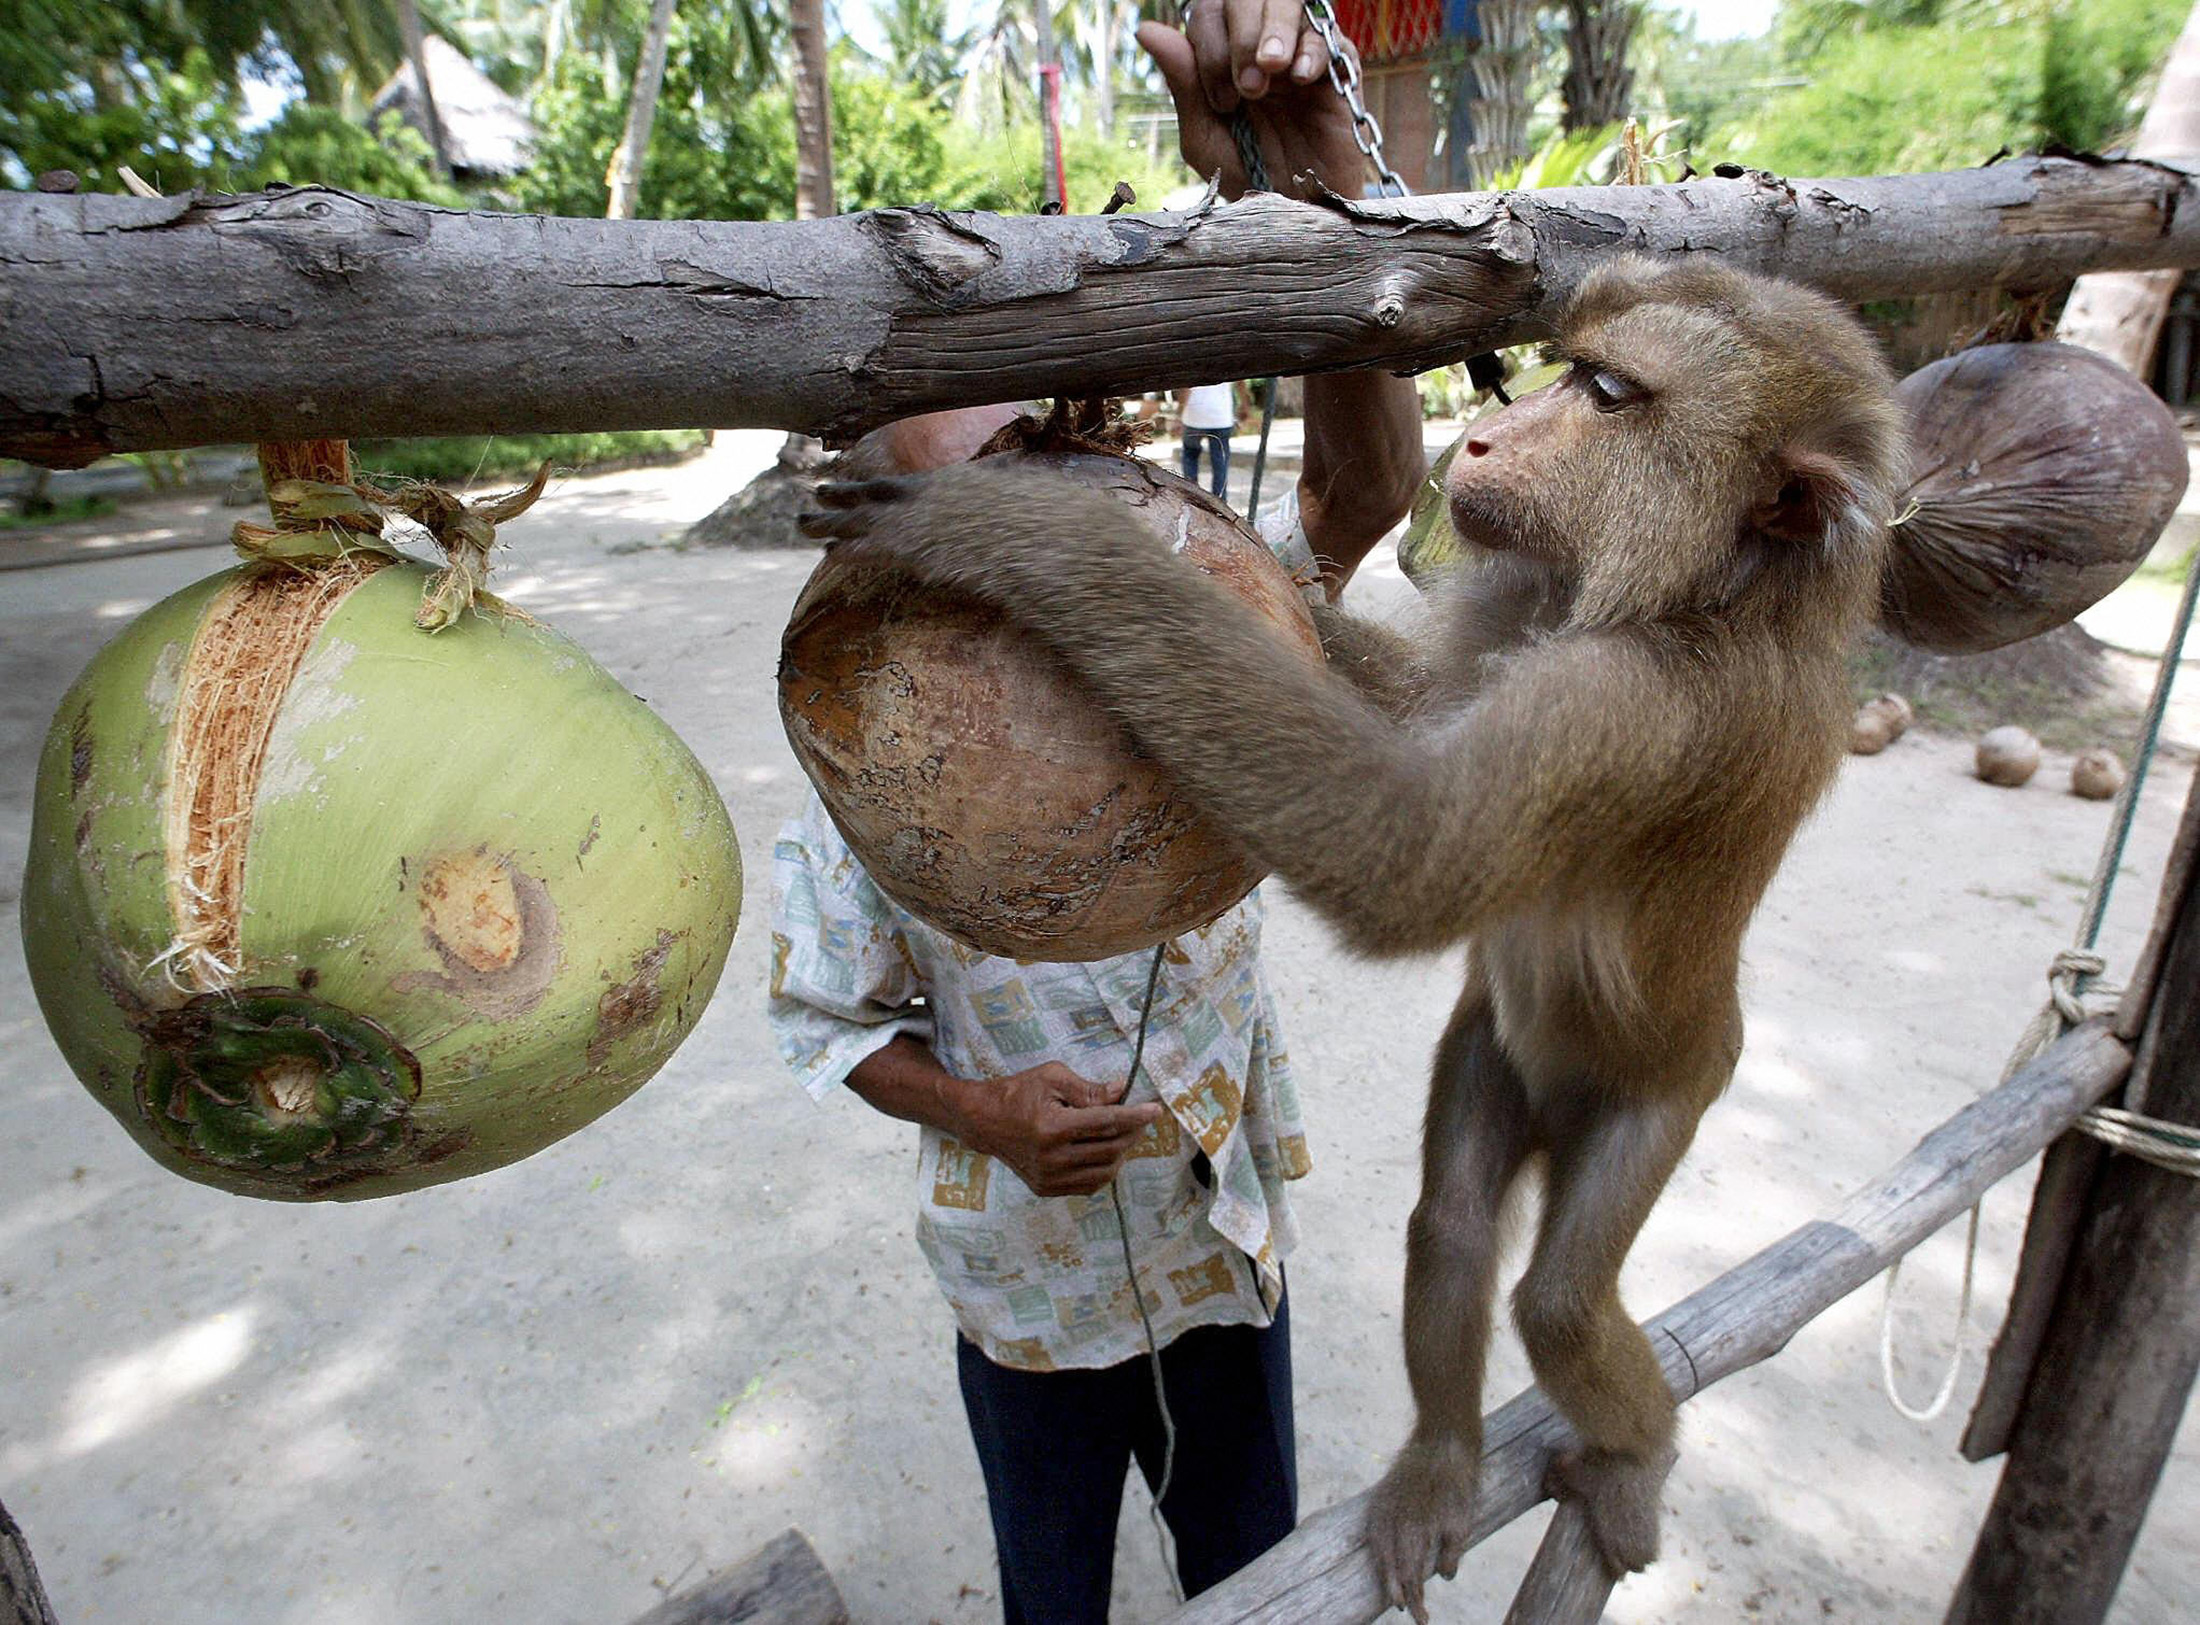 A monkey trainer works with a monkey showing it how to collect coconuts at the Samui Monkey Center on Samui island in Thailand.